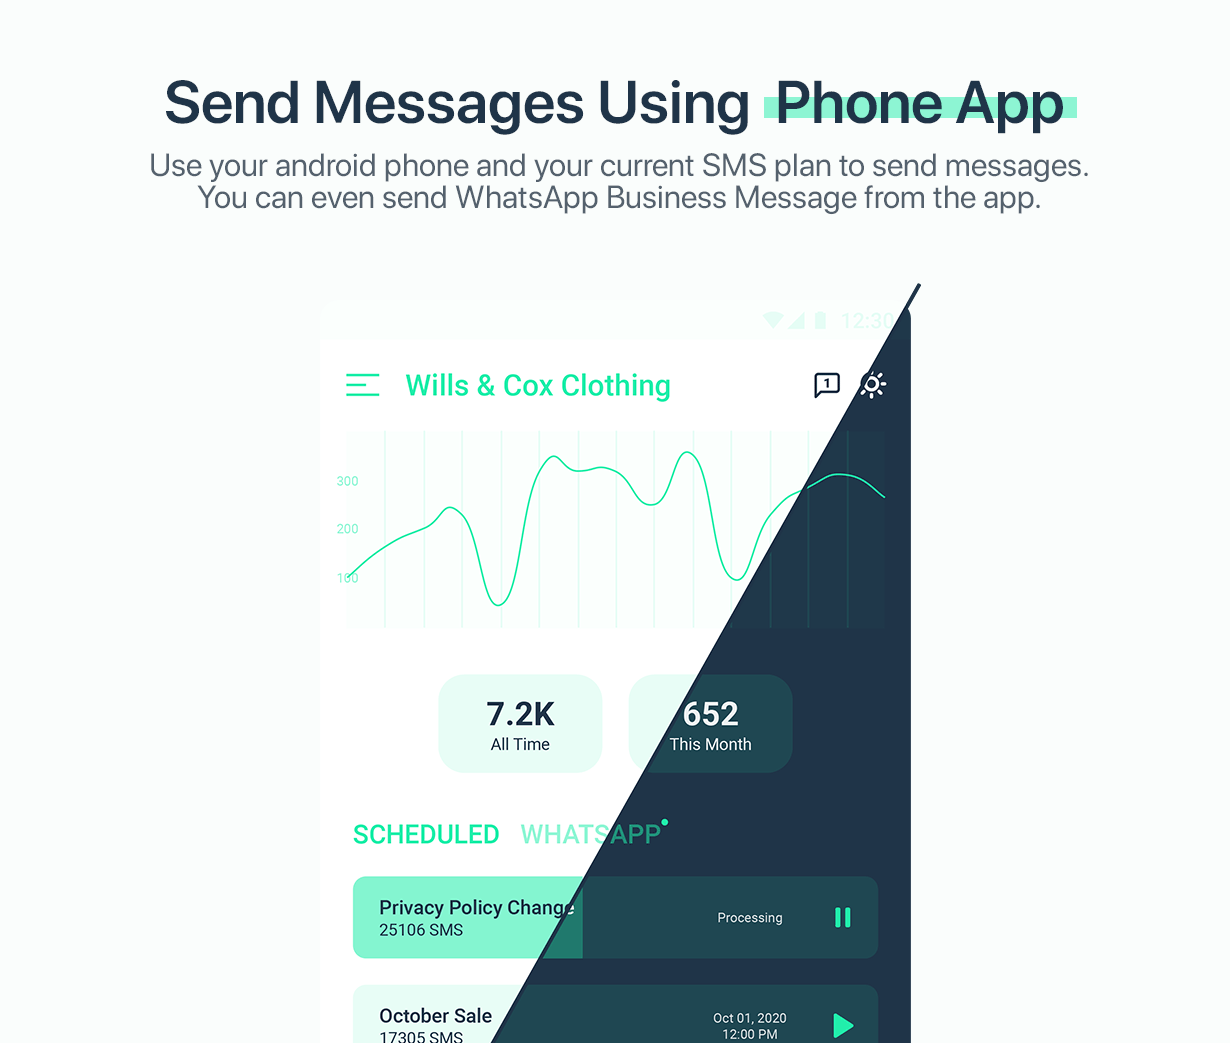 Send Messages using Phone App